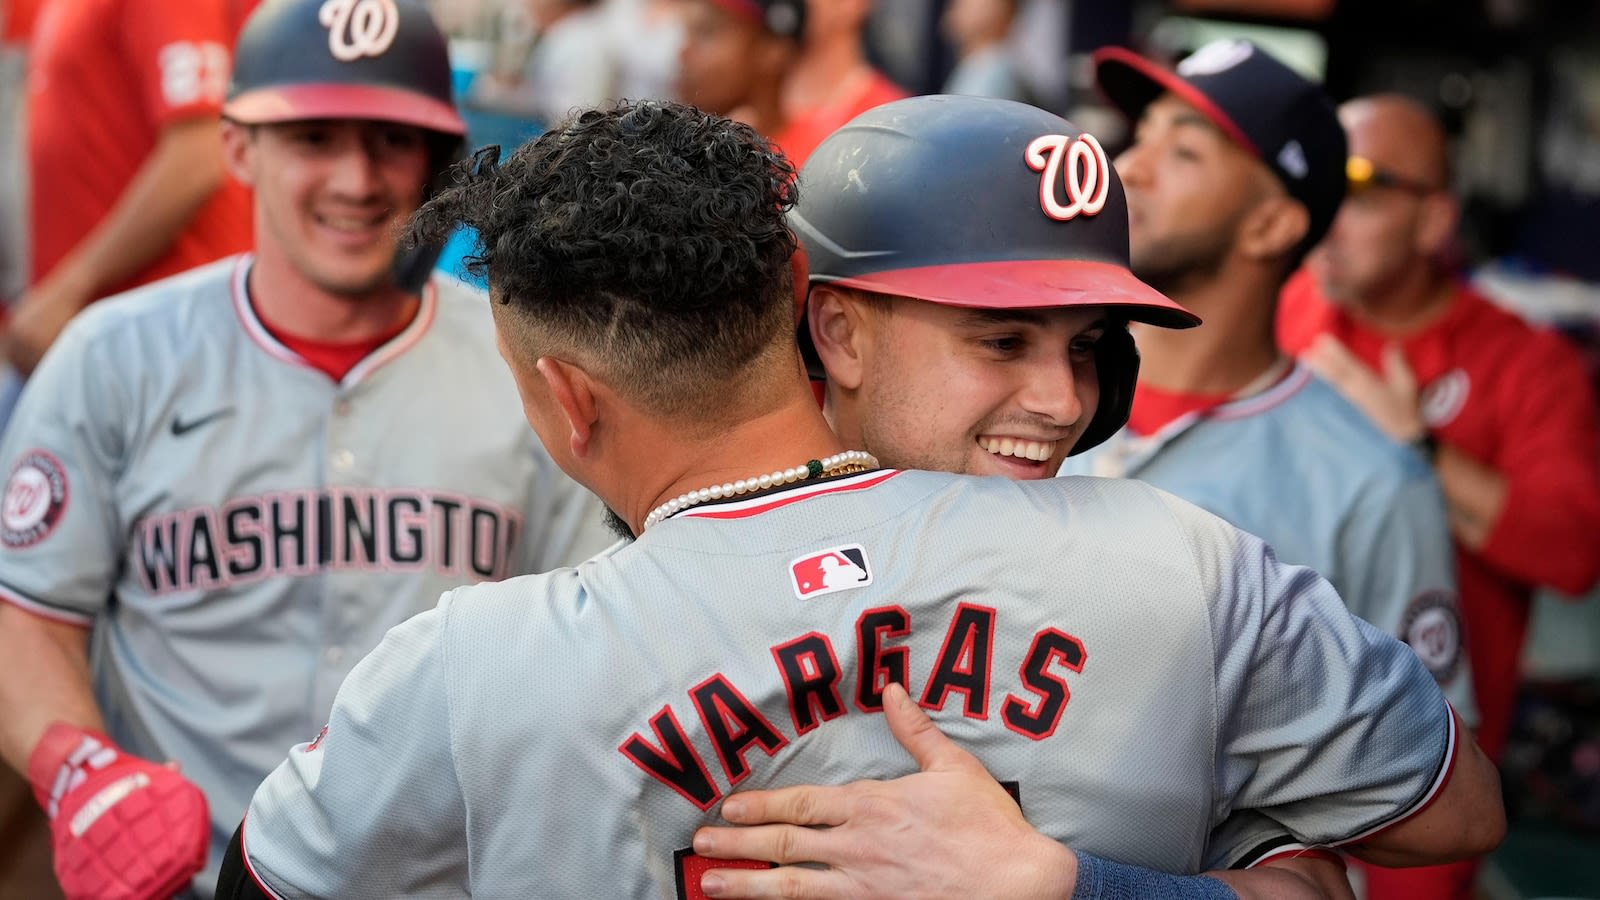 Williams, Nationals hold down weak-hitting Braves 3-1 for rare 4-game series win